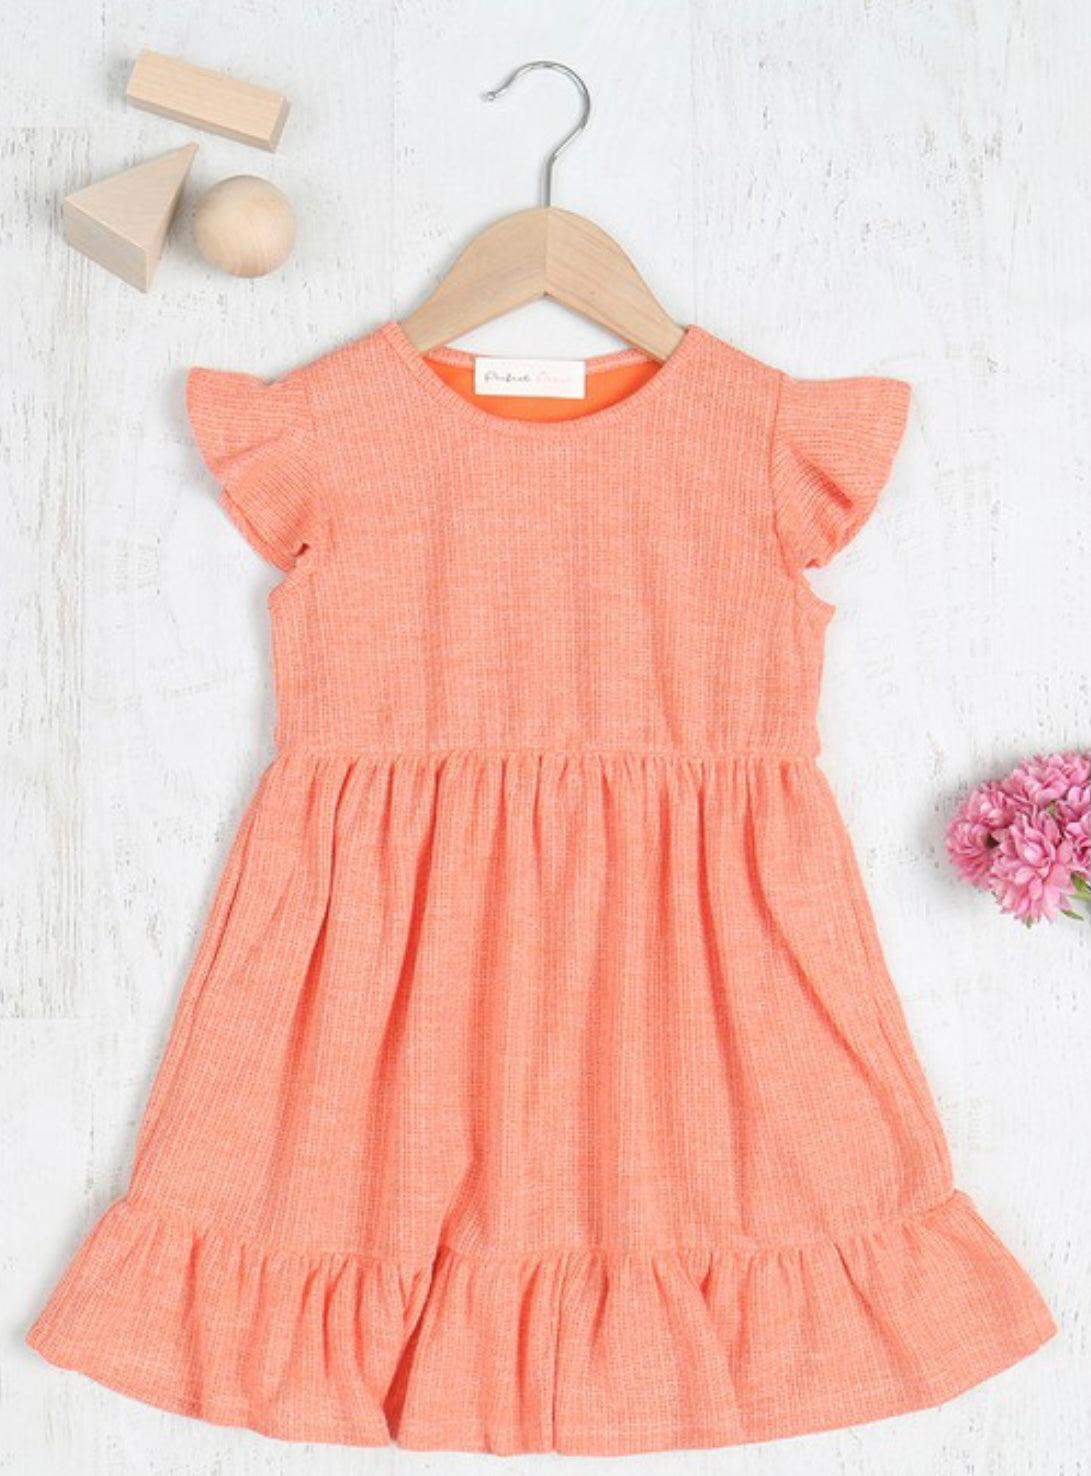 Girls' Pretty in Peach or Mint Dreams Sundress – Alexander and Fitz